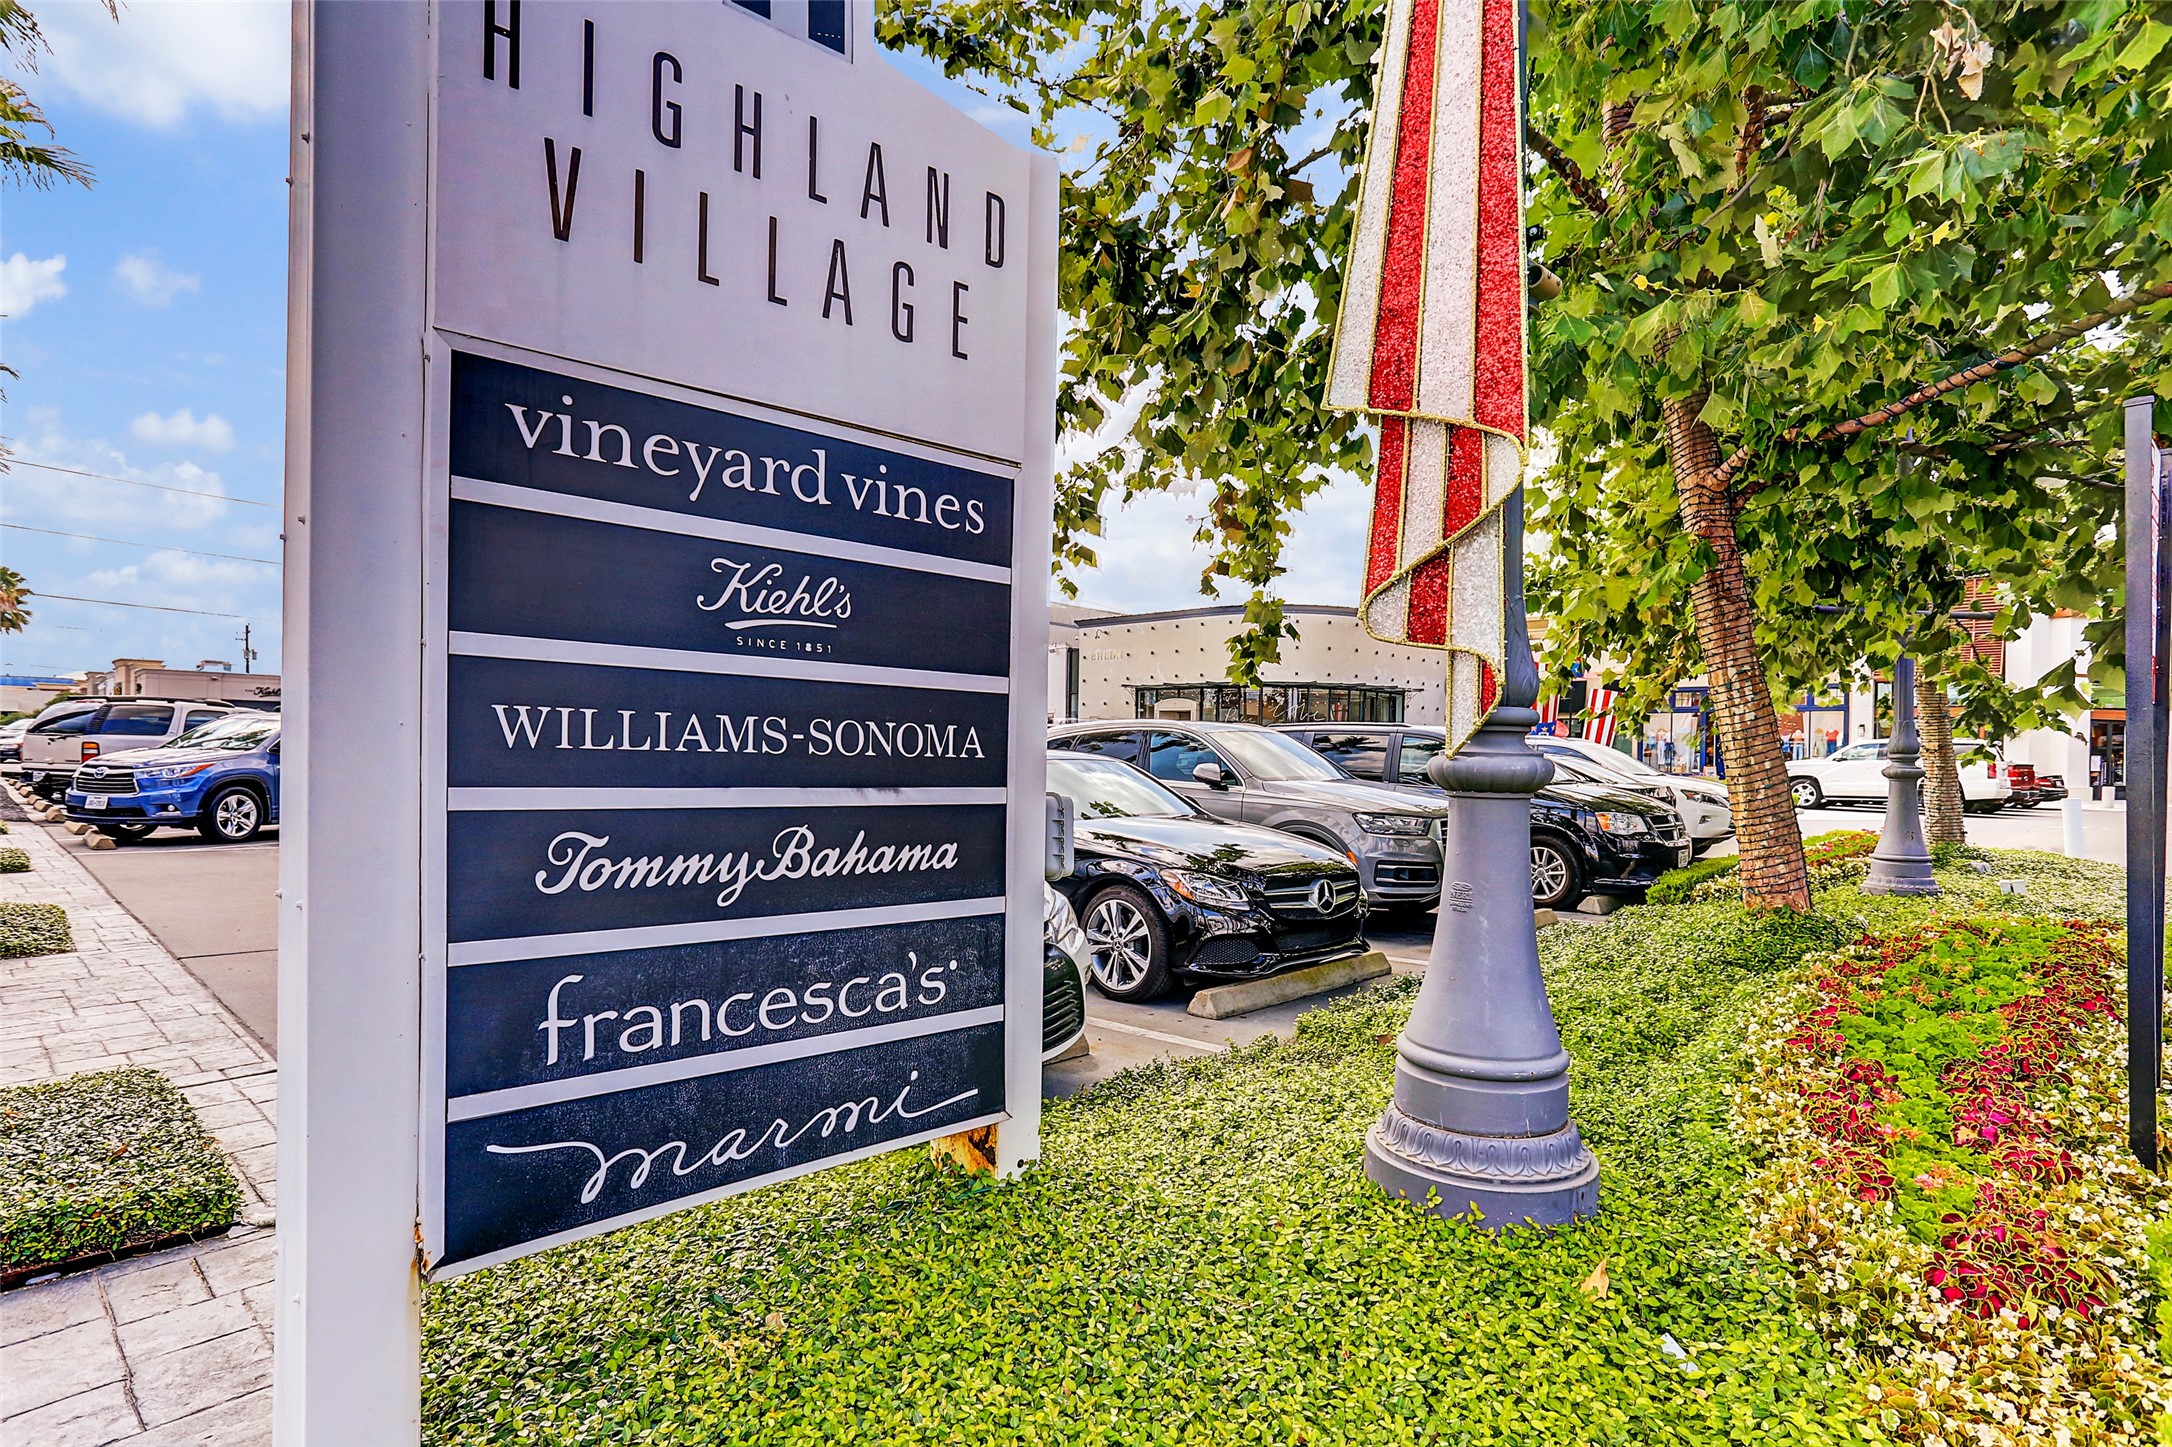 Highland Village shopping and dining just blocks away!